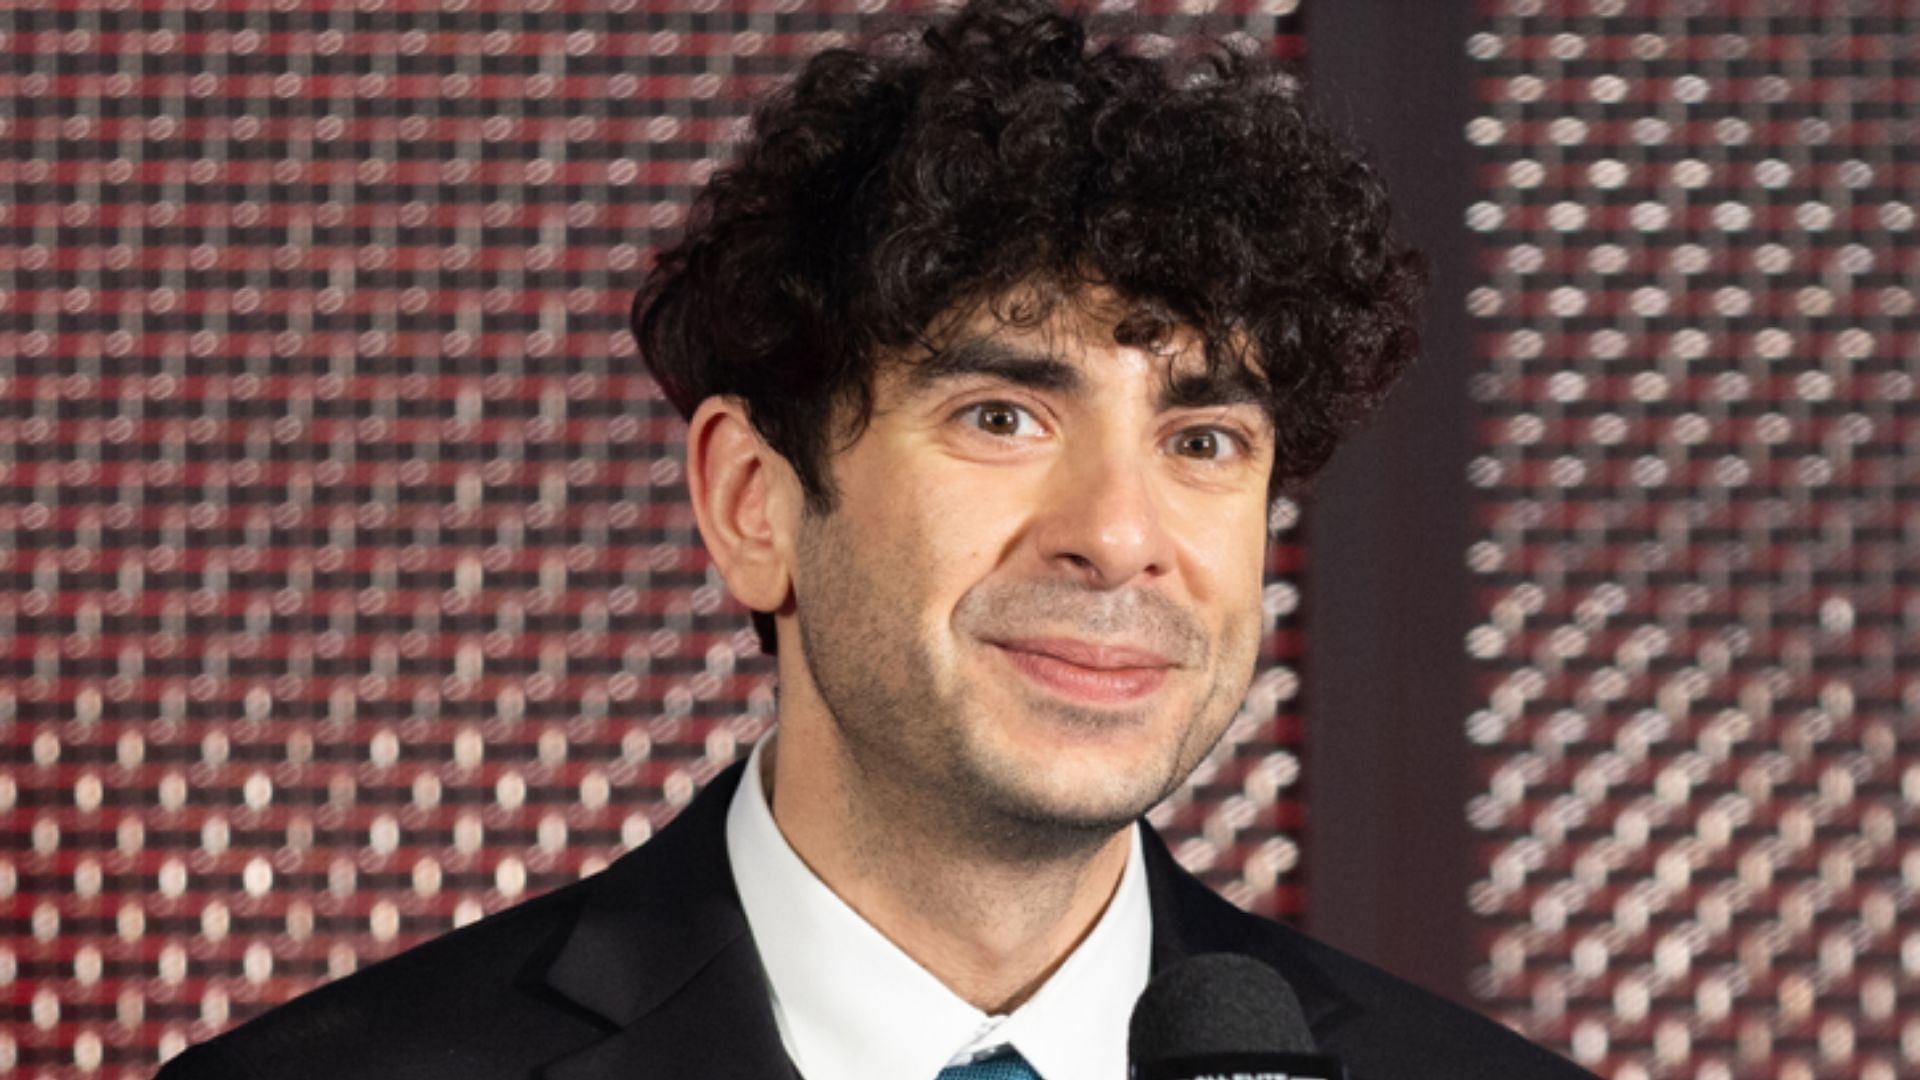 Tony Khan is the CEO and Head of creative of All Elite Wrestling